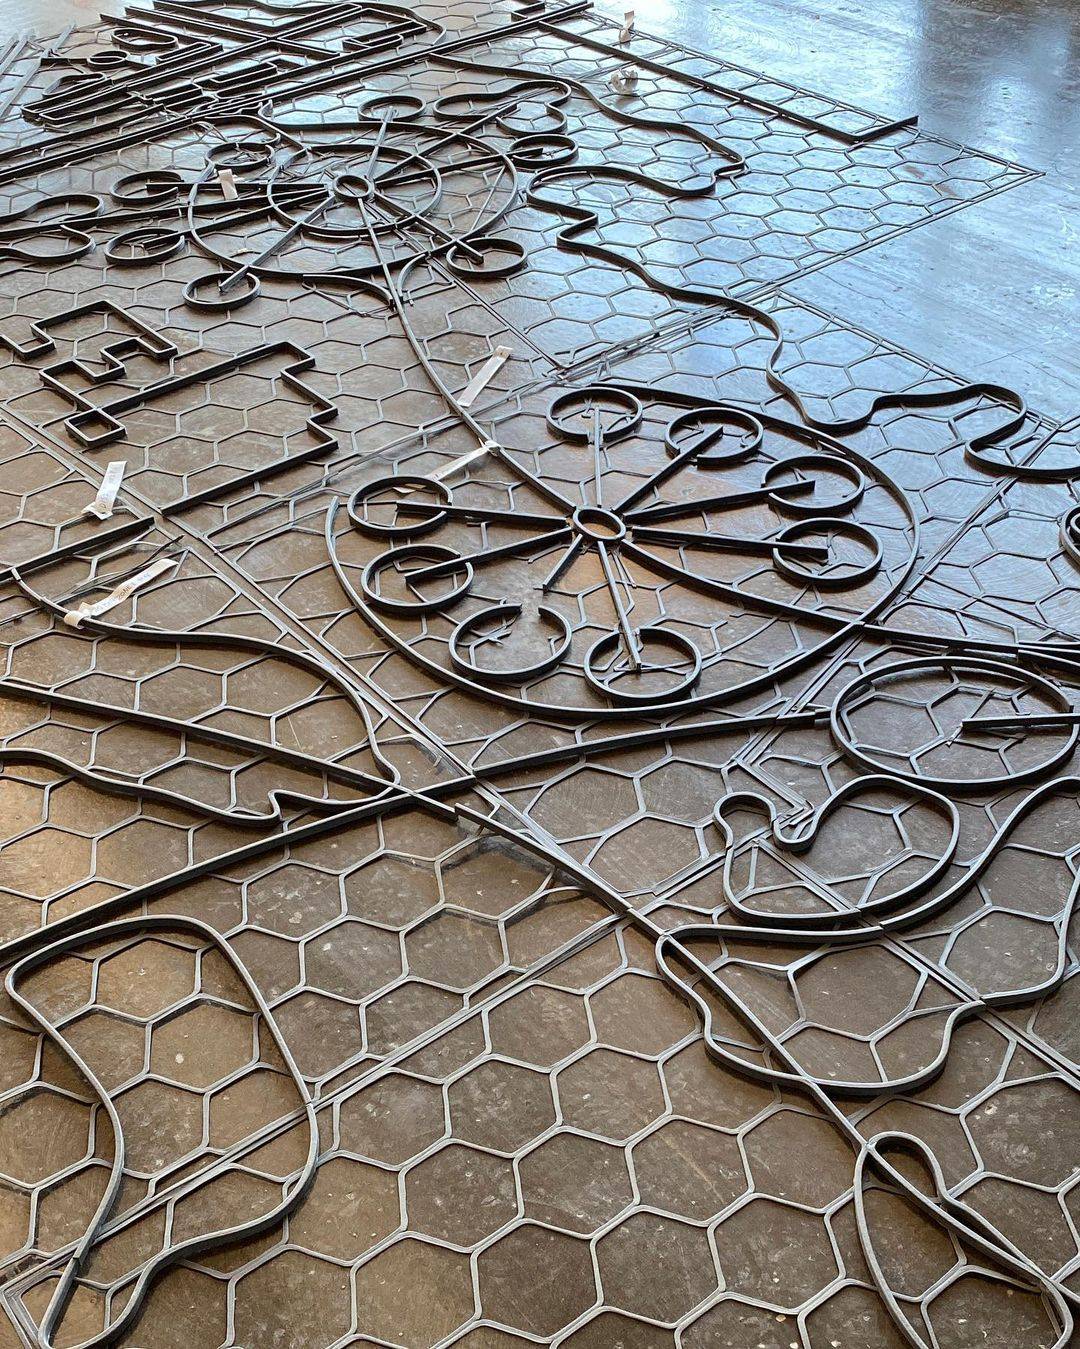 Flooring at Connections Cafe and Eatery draws inspiration from original Walt Disney World and EPCOT concepts and plans